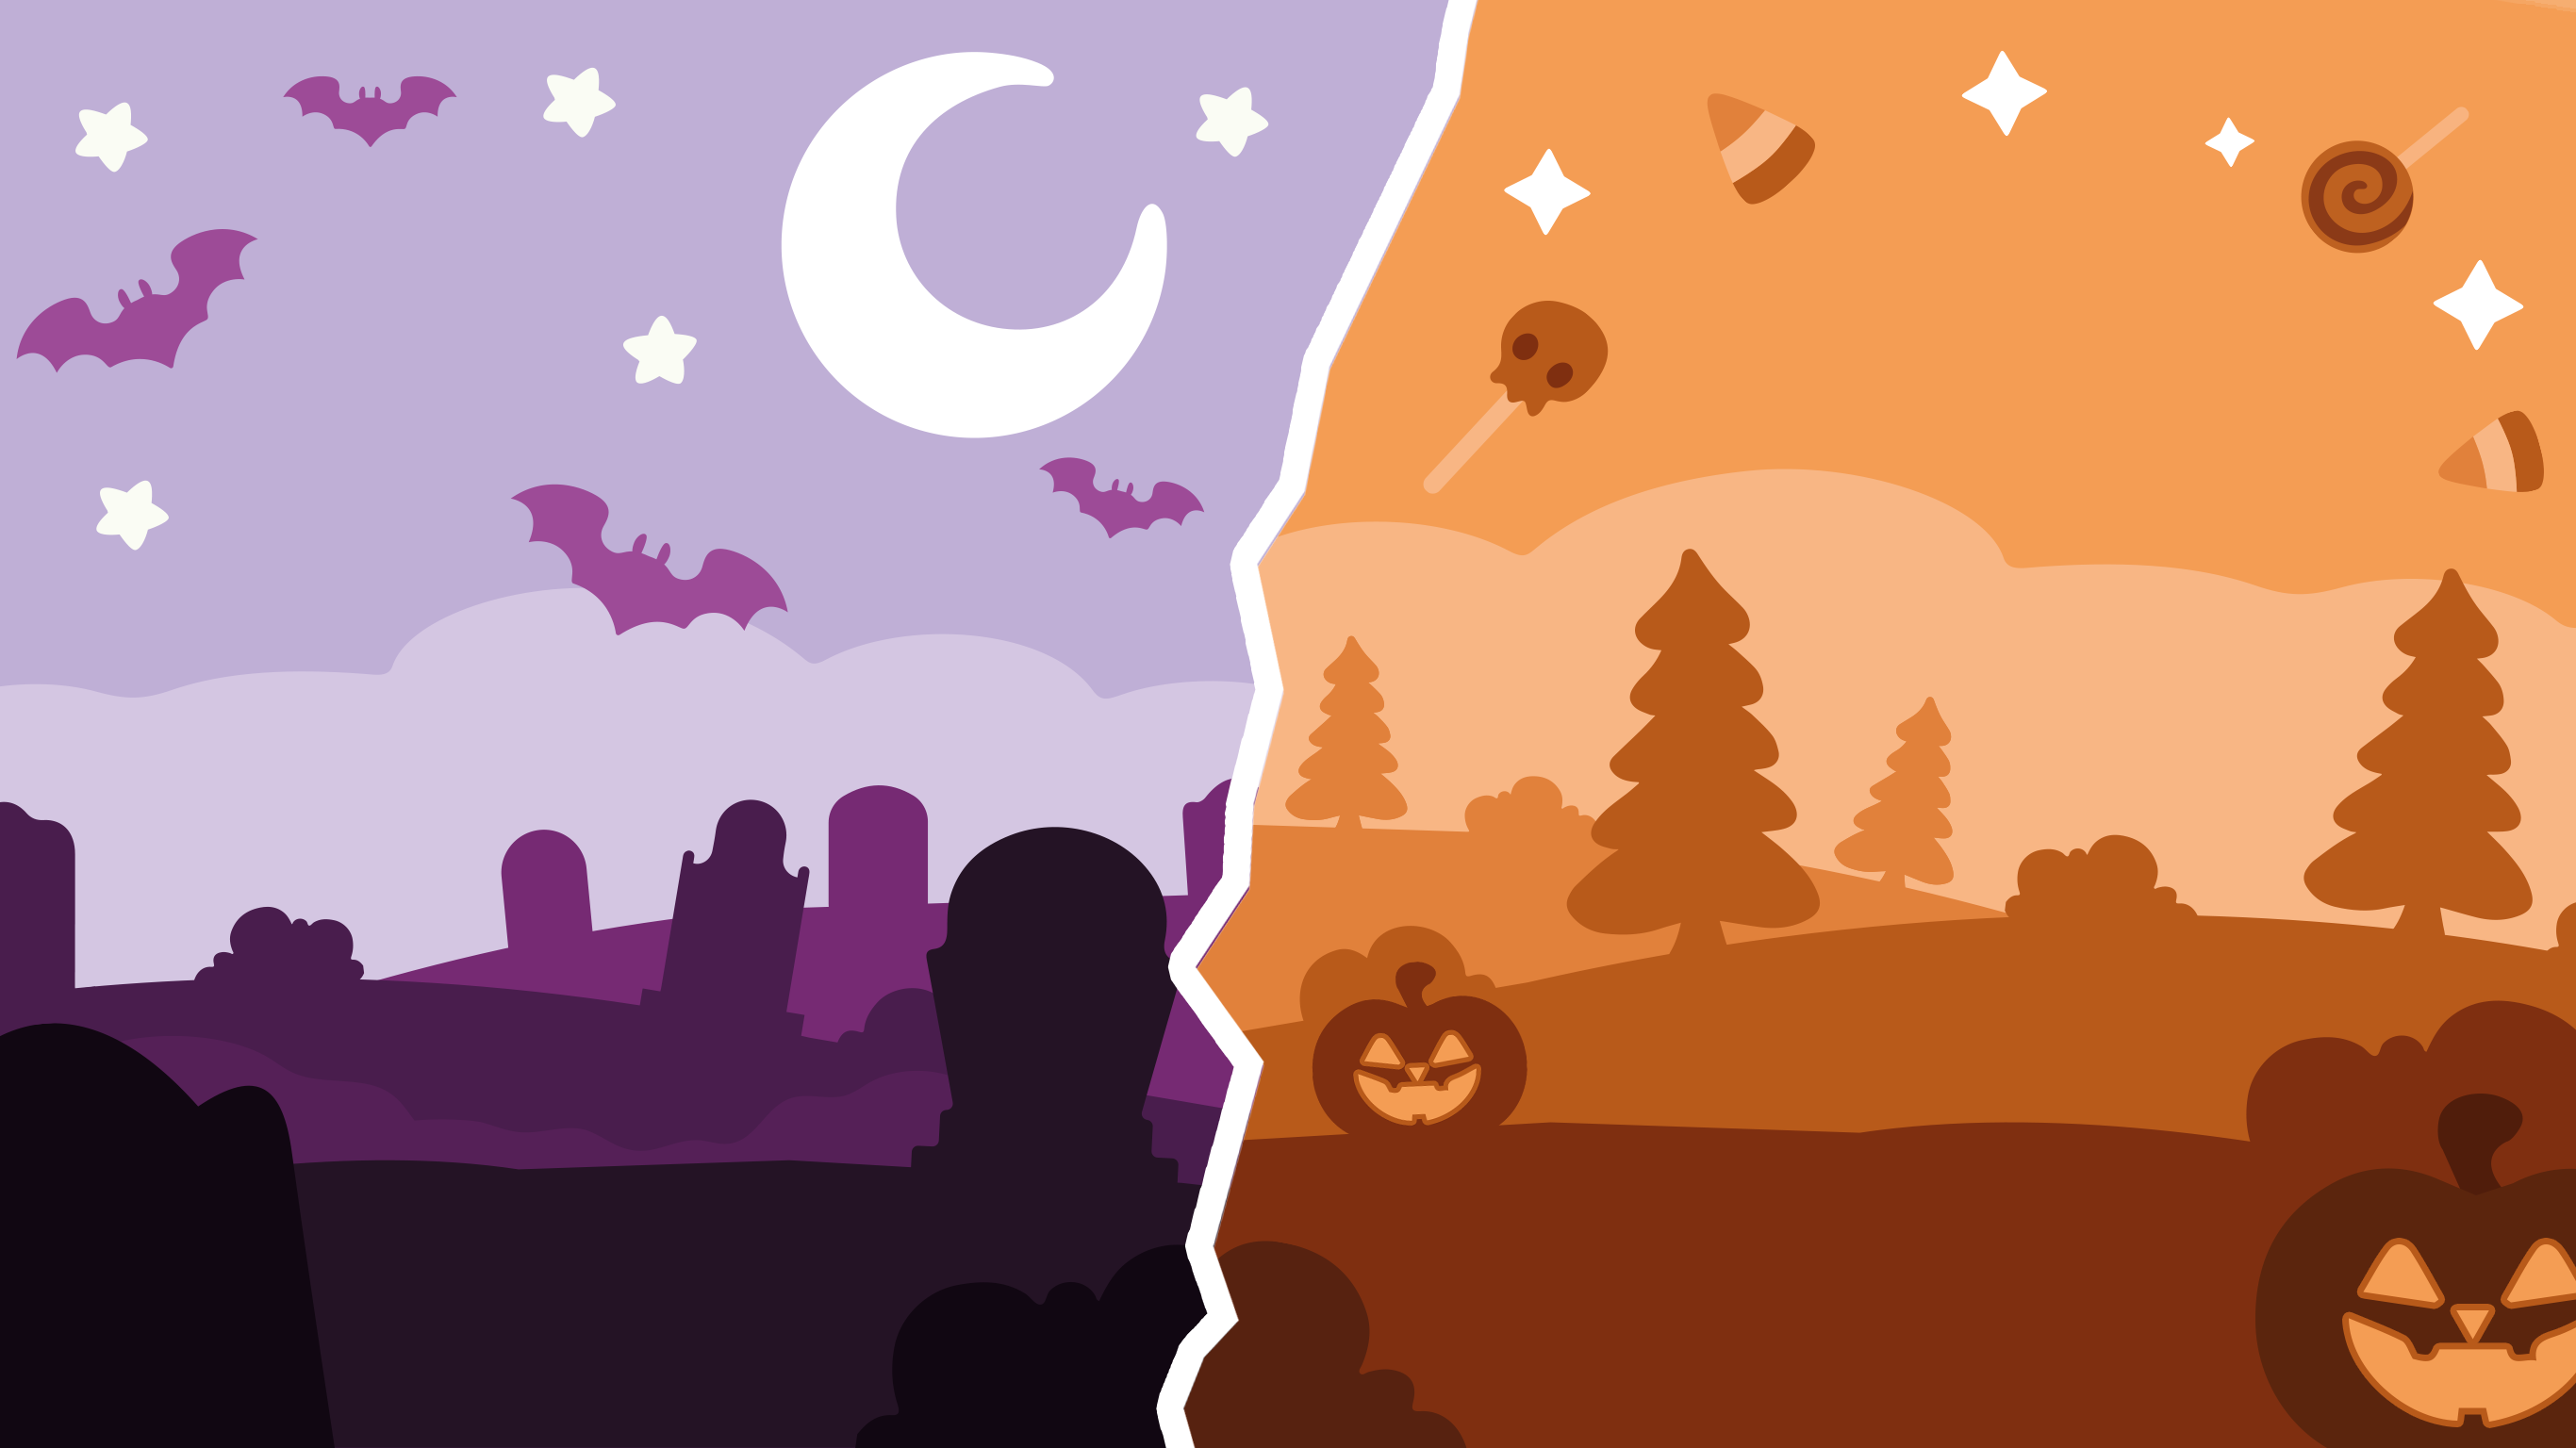 Fall Guys gets spooktacular with the Falloween event and more!